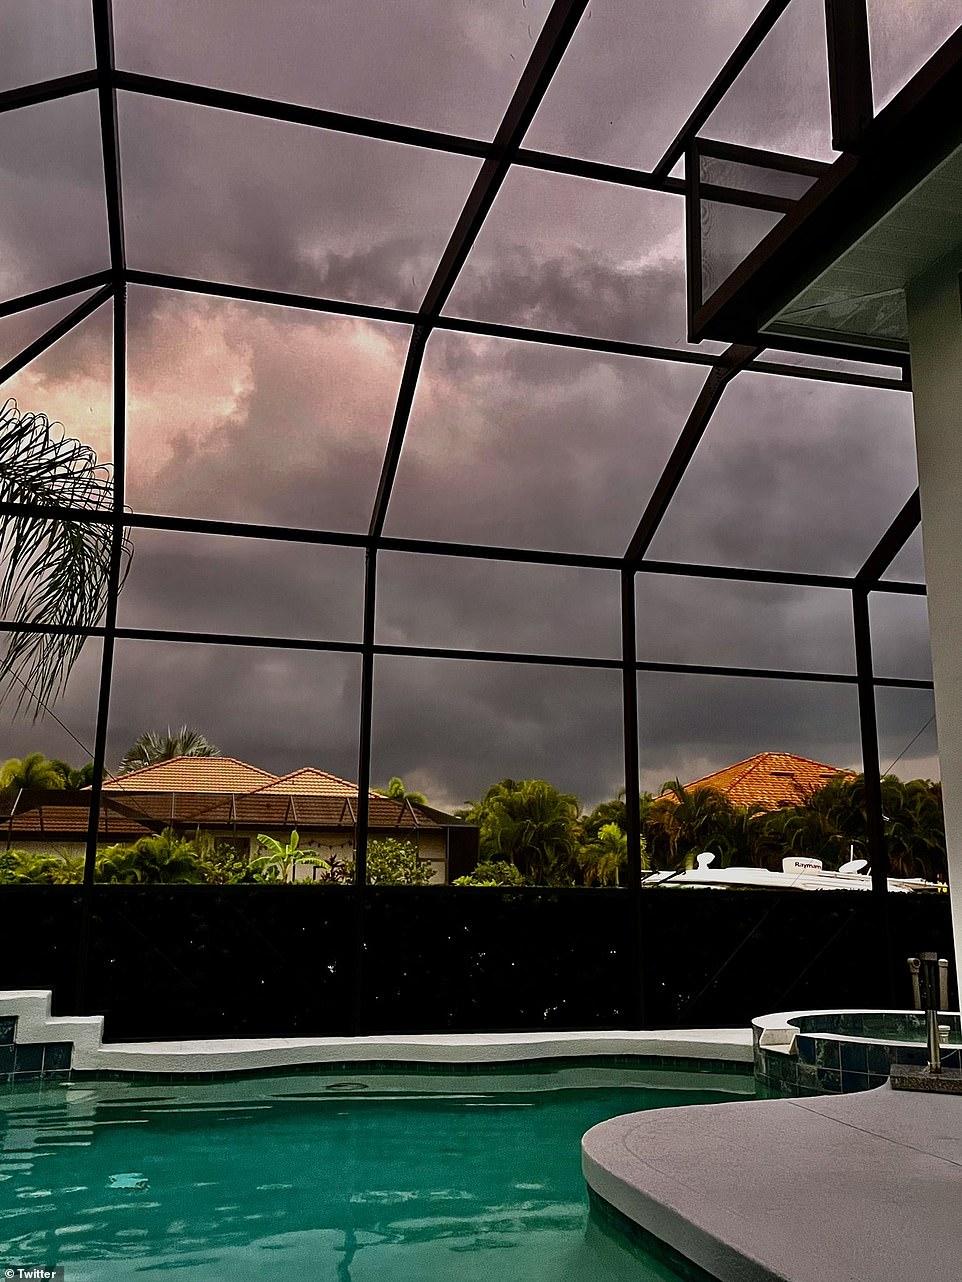 Dark cloud shave been forming above villa's in Florida as residents prepare to be hit for Category 3 Hurricane Ian on Tuesday